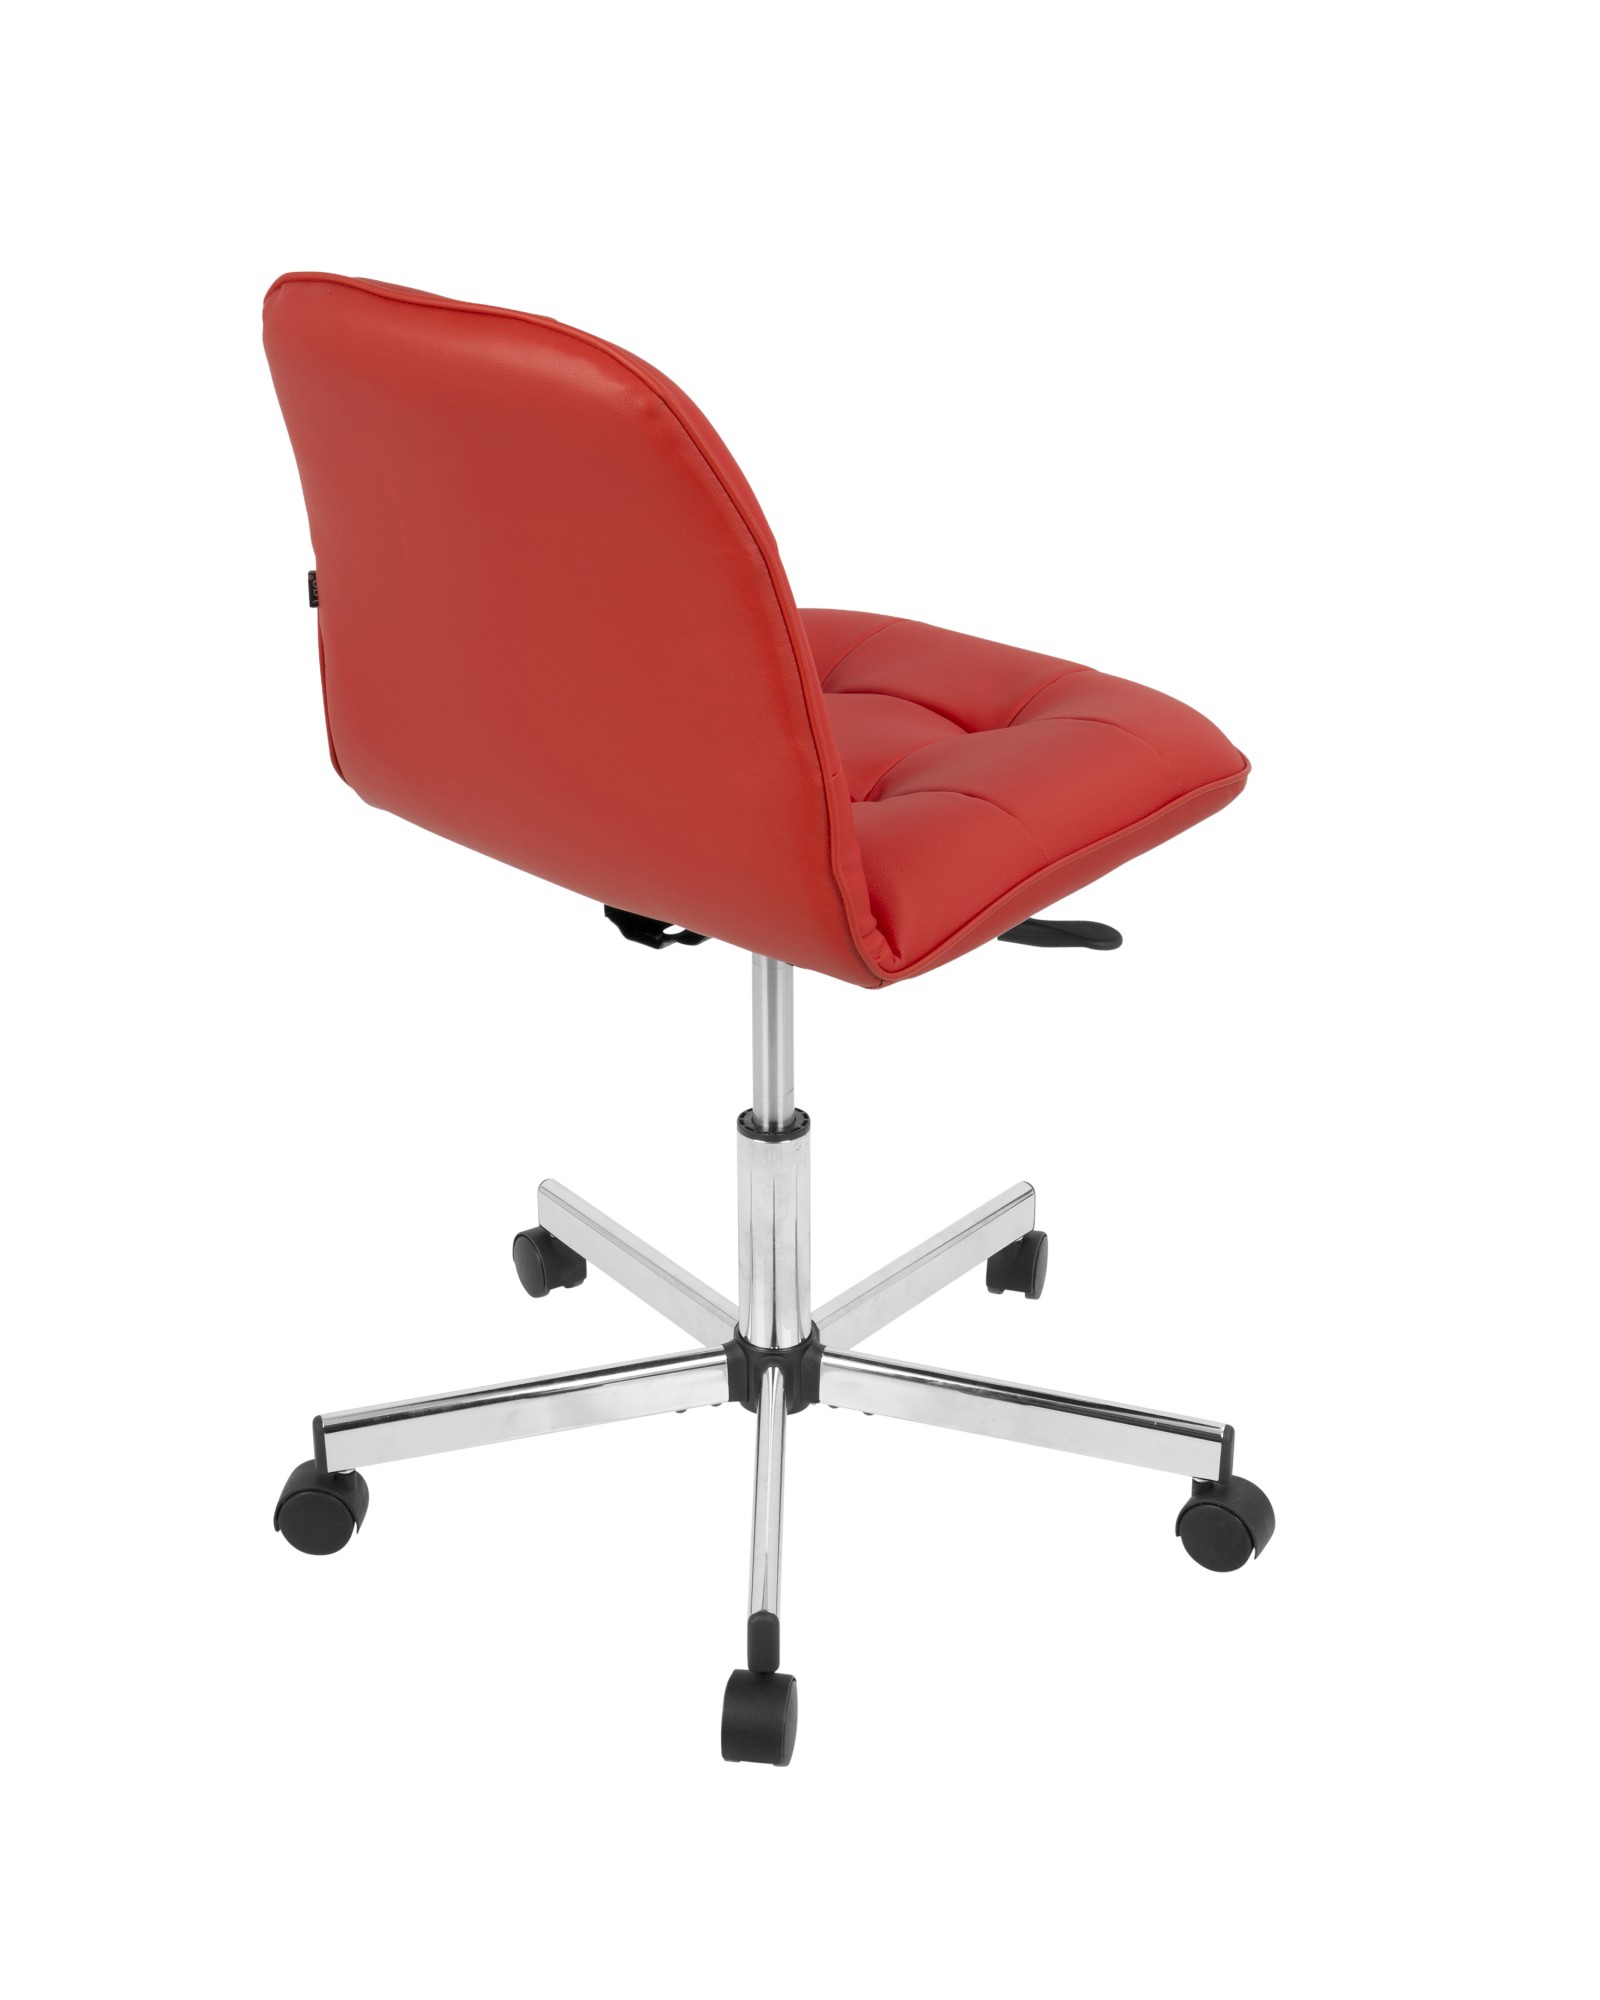 Cora Contemporary Task Chair in Red Faux Leather